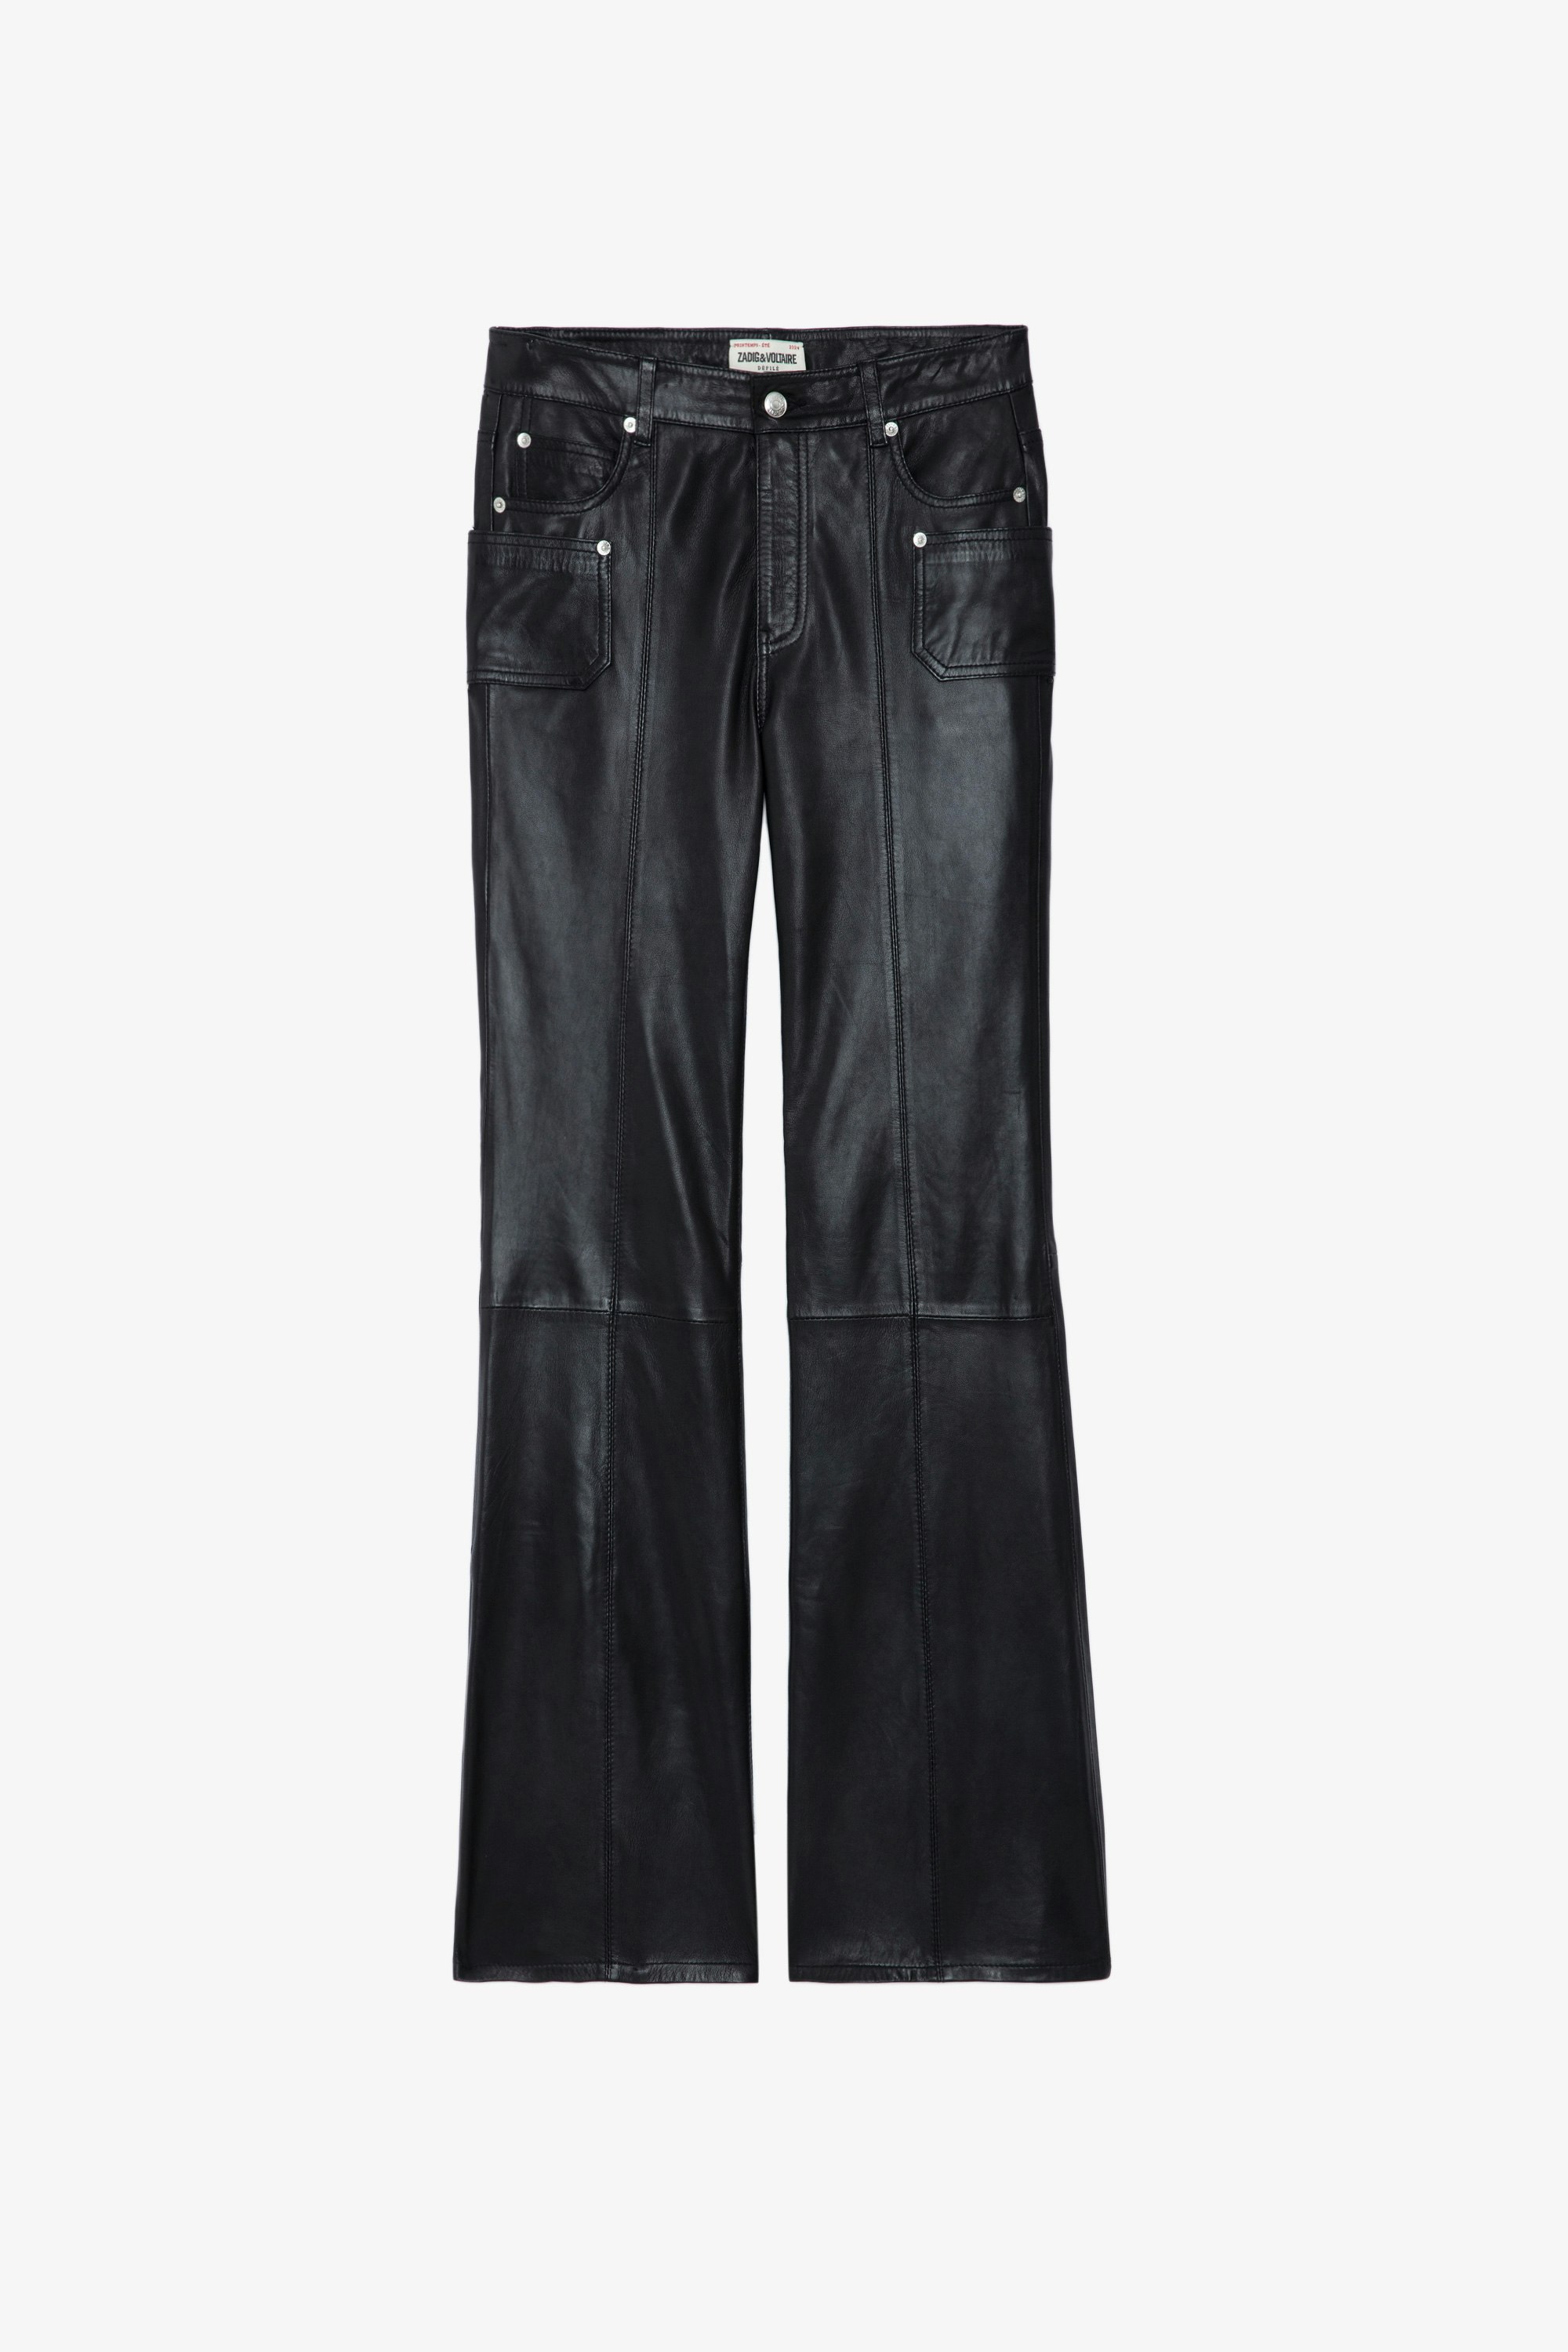 Elvir Leather Pants - Women's leather bootcut pants with multiple pockets.